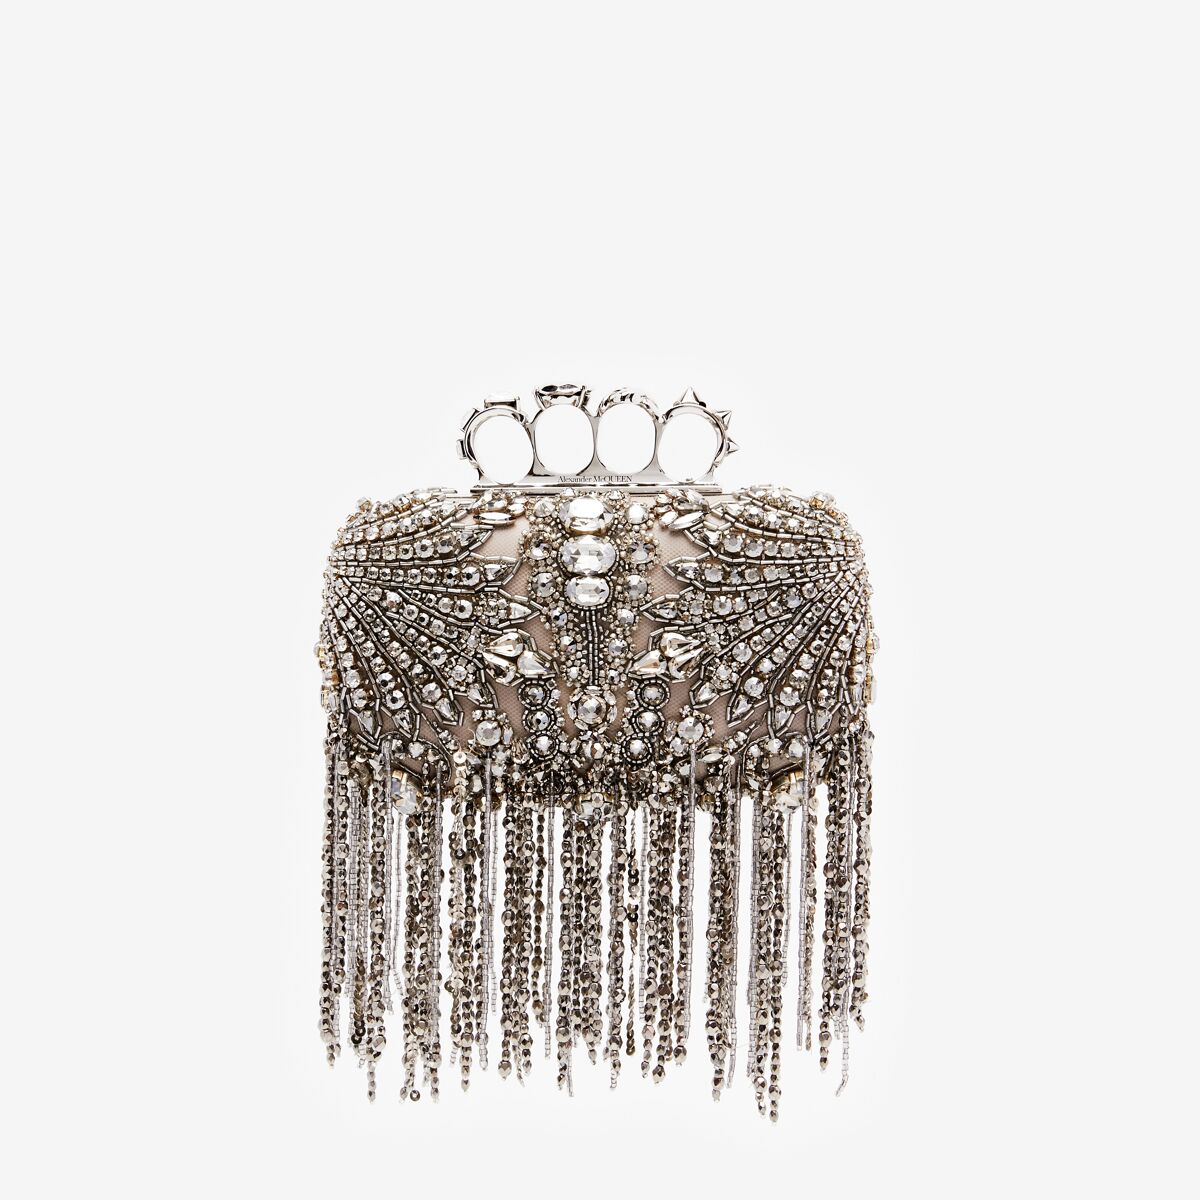 ALEXANDER MCQUEEN - Exploded Victorian Jewel Knuckle Clutch - Item 7554551T1A88550